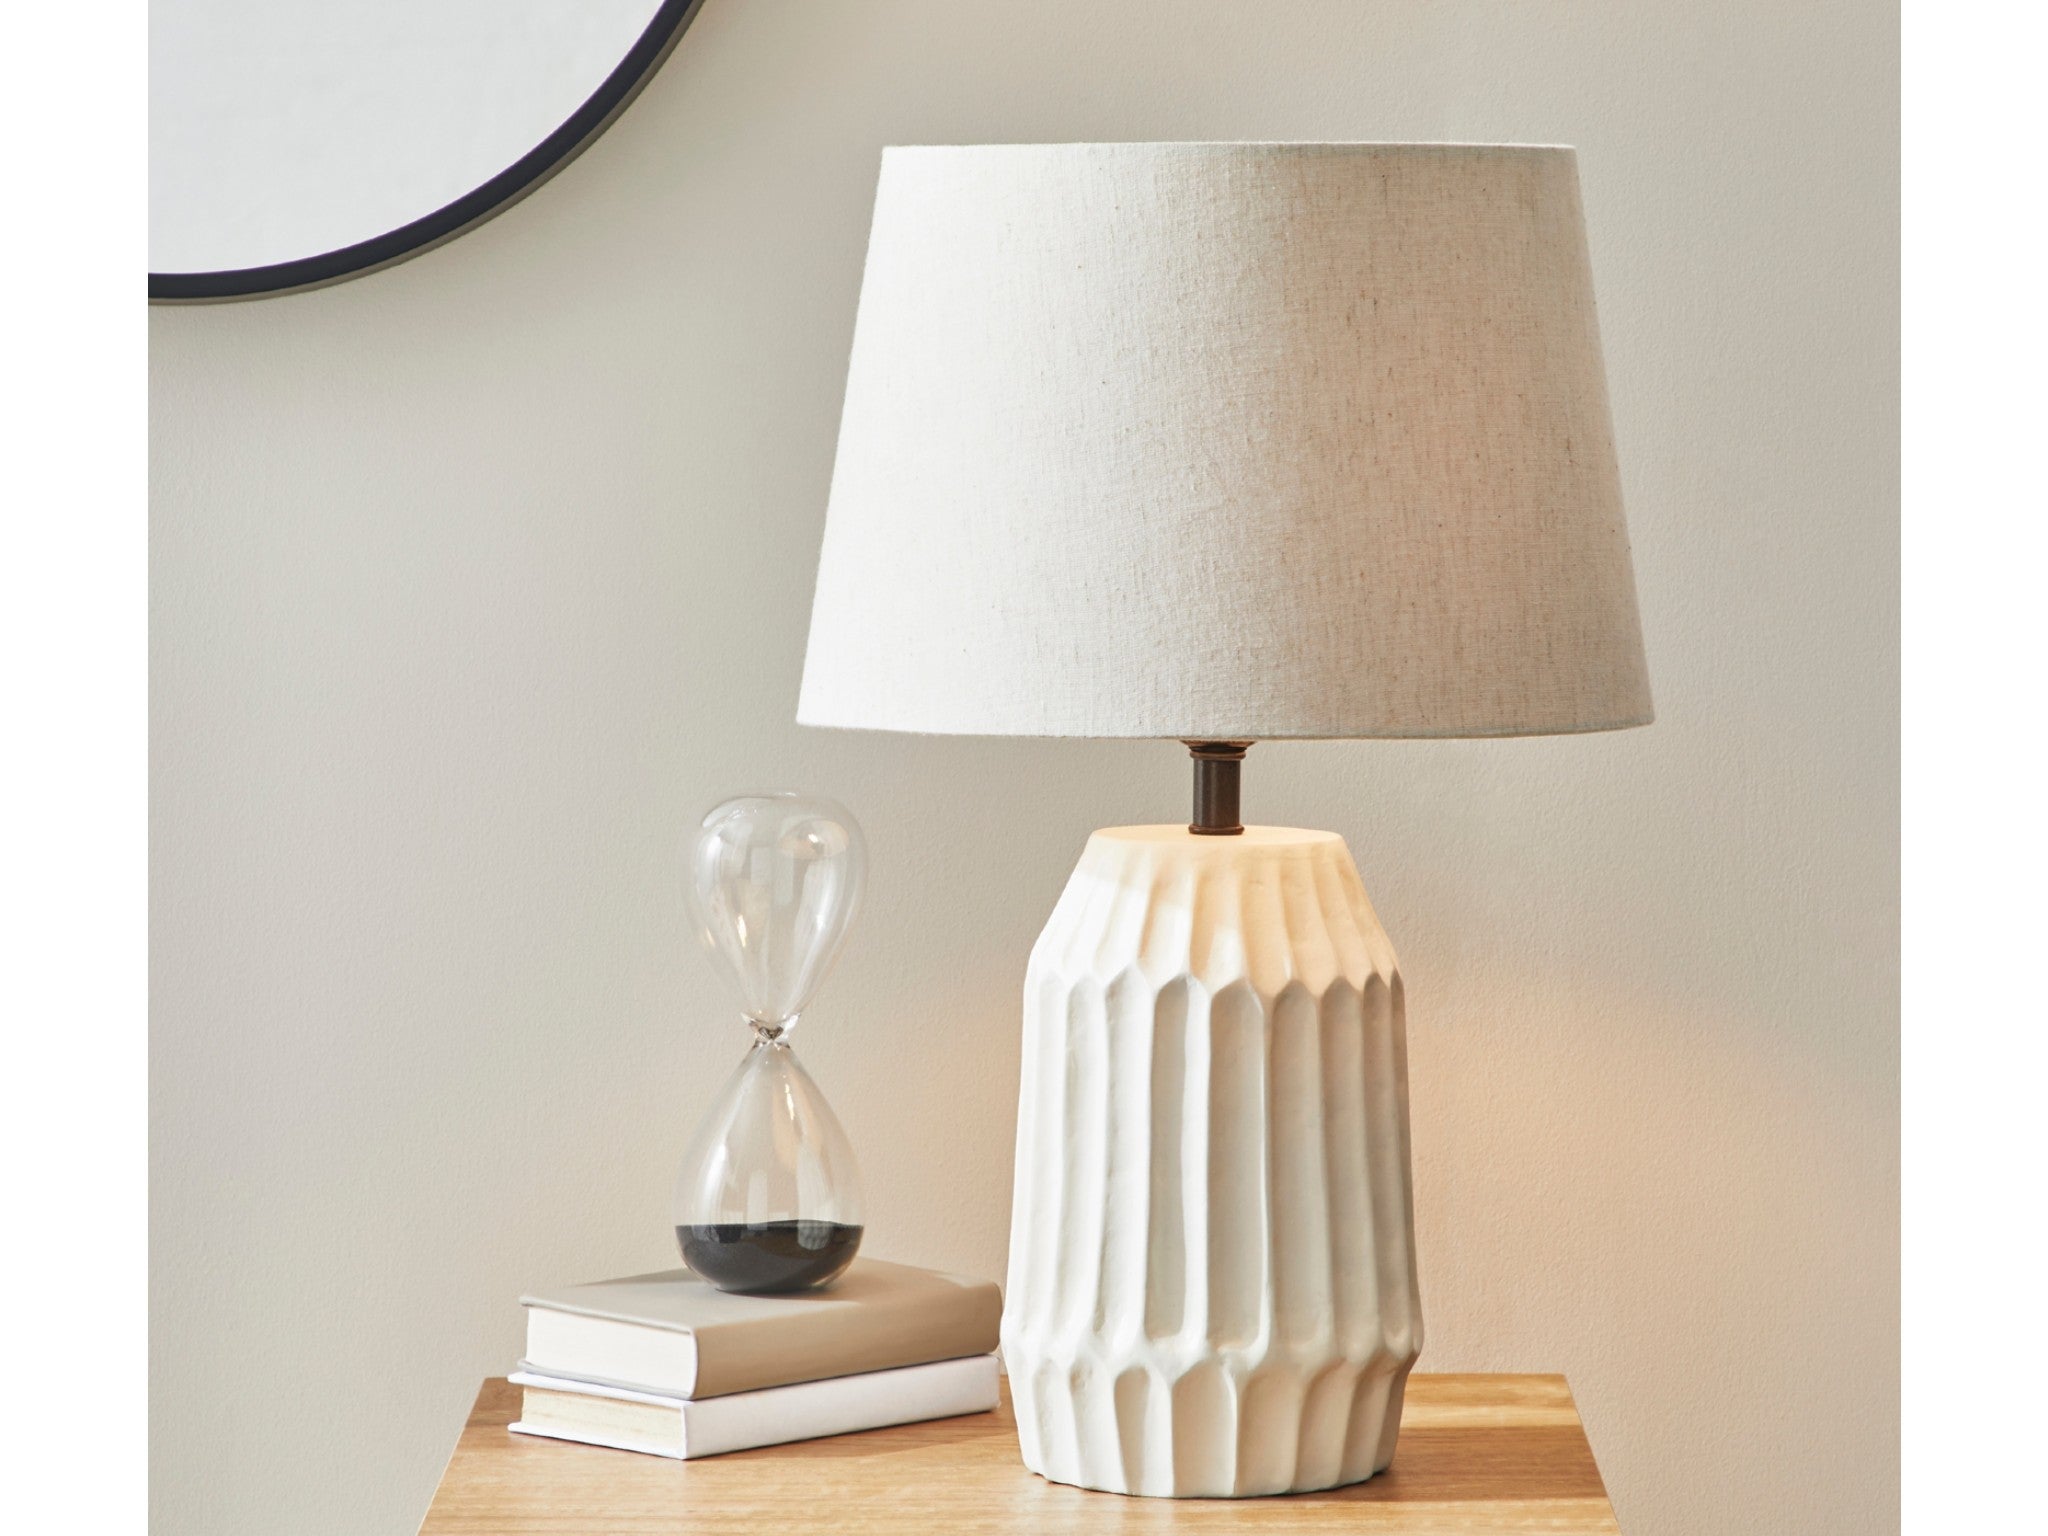 Best bedside lamps: touch lamps contemporary and classic designs | The Independent